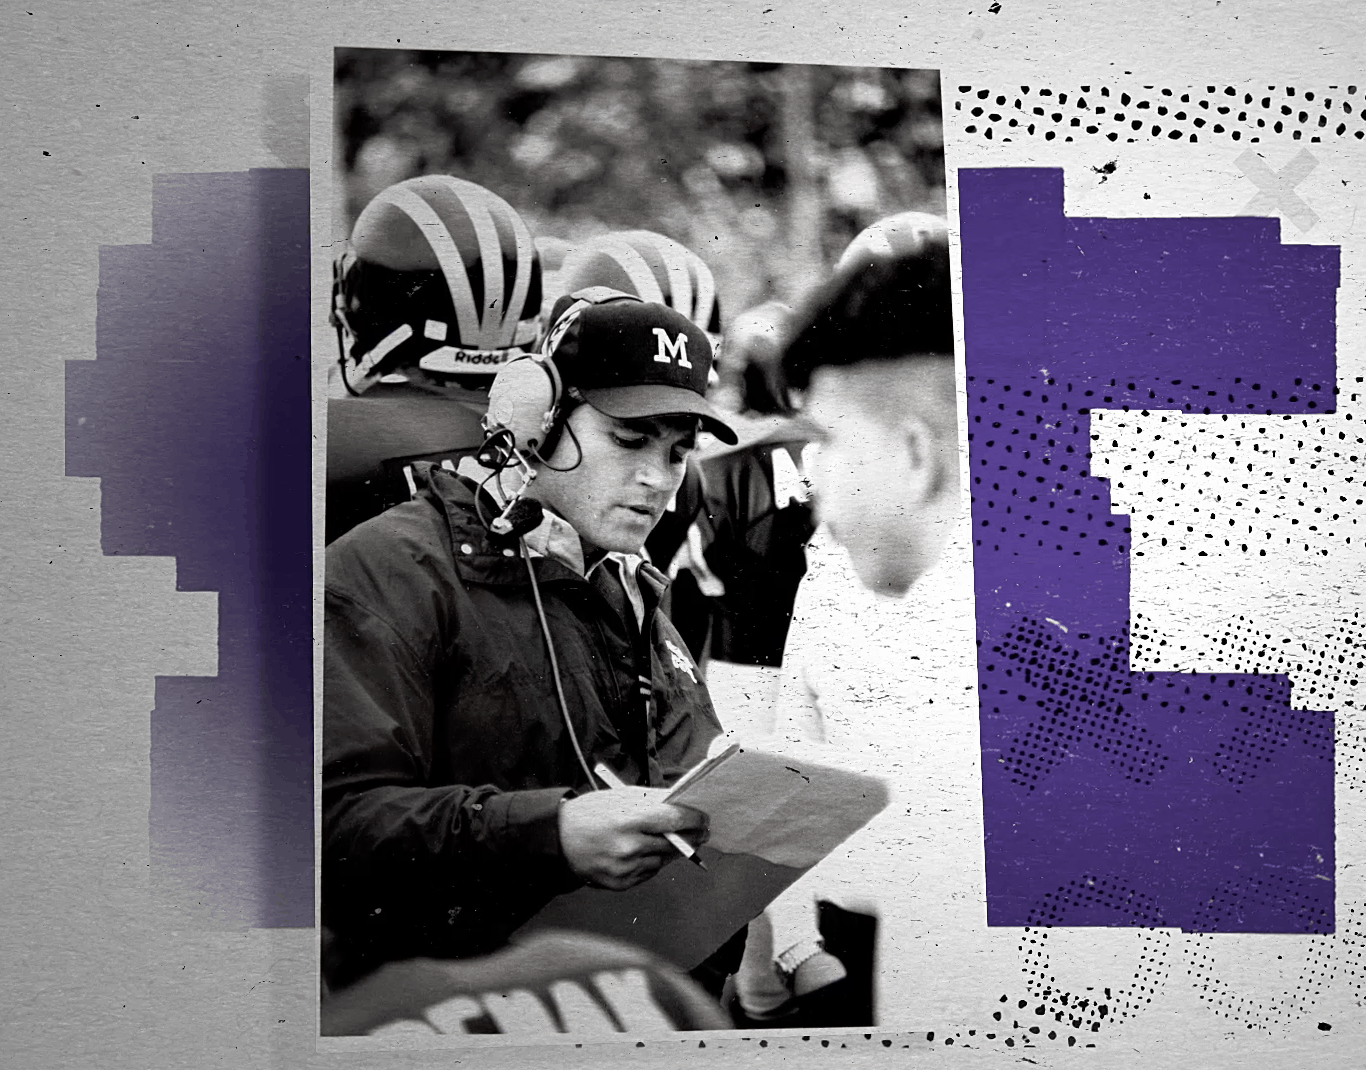 Young Les Miles reads from a clipboard during a football game in black and white